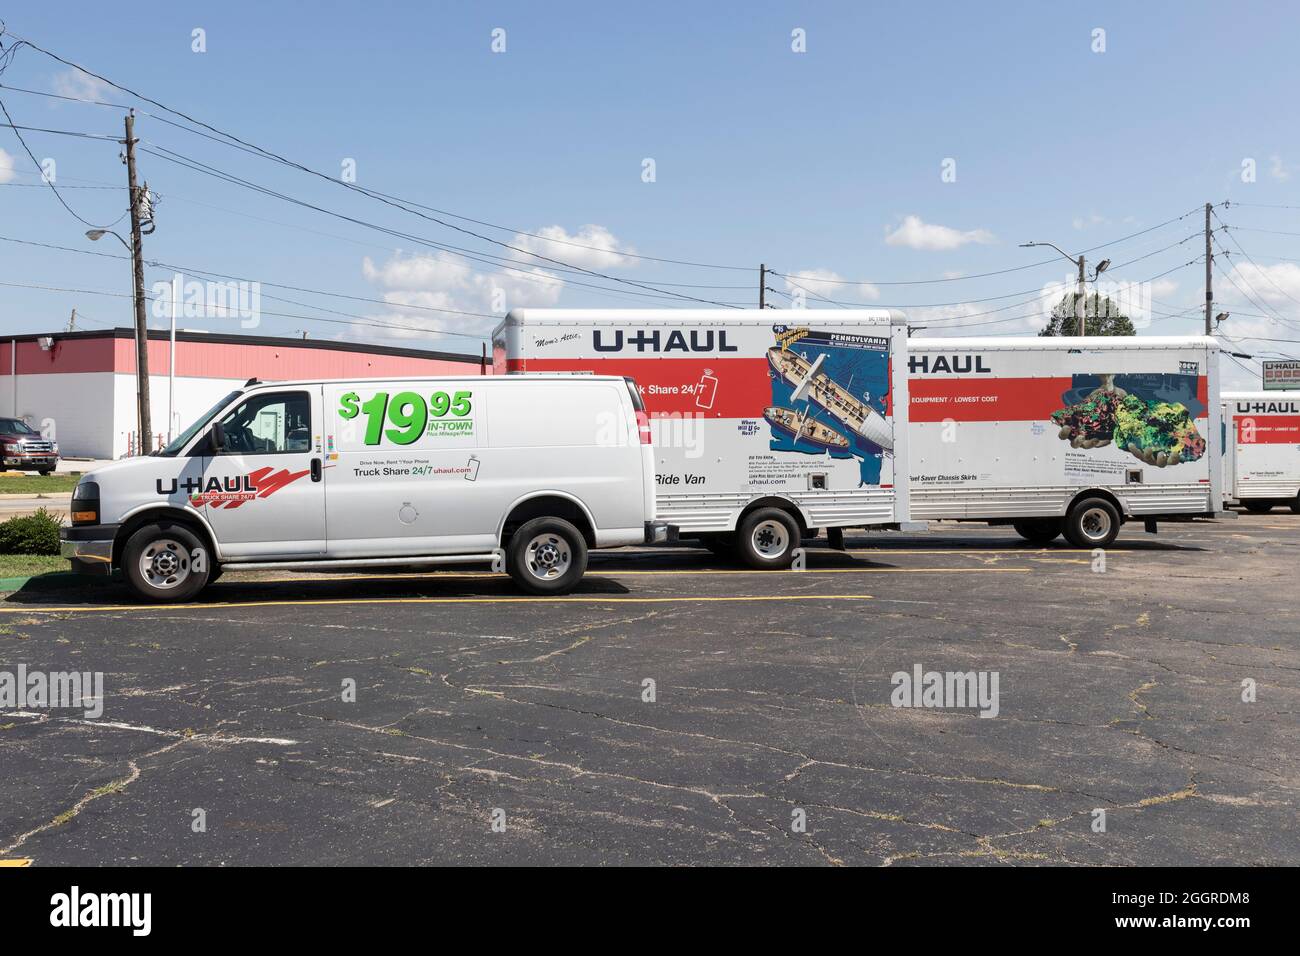 Indianapolis - Circa September 2021: U-Haul Moving Truck Rental Location. U-Haul offers moving and storage solutions. Stock Photo